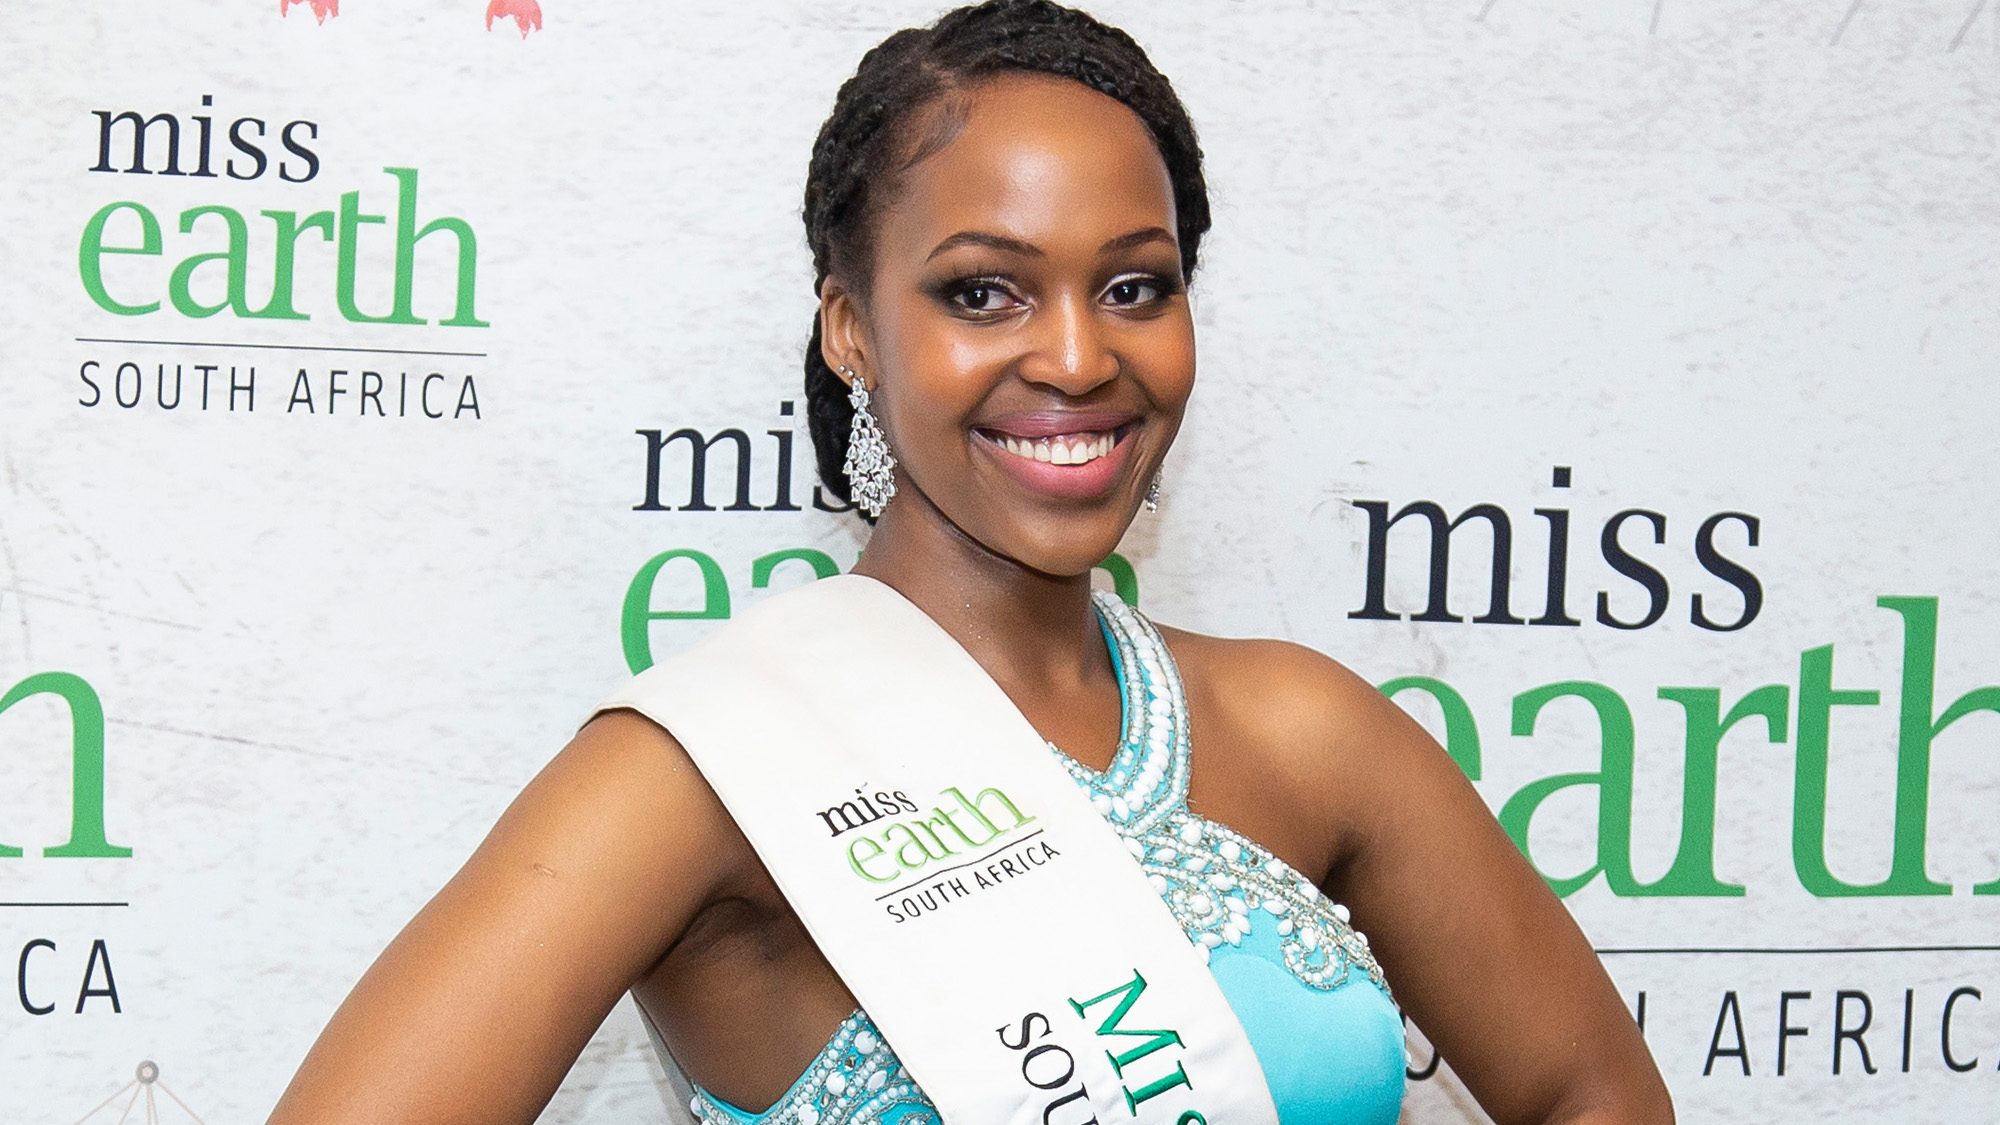 Miss Earth South Africa 2022